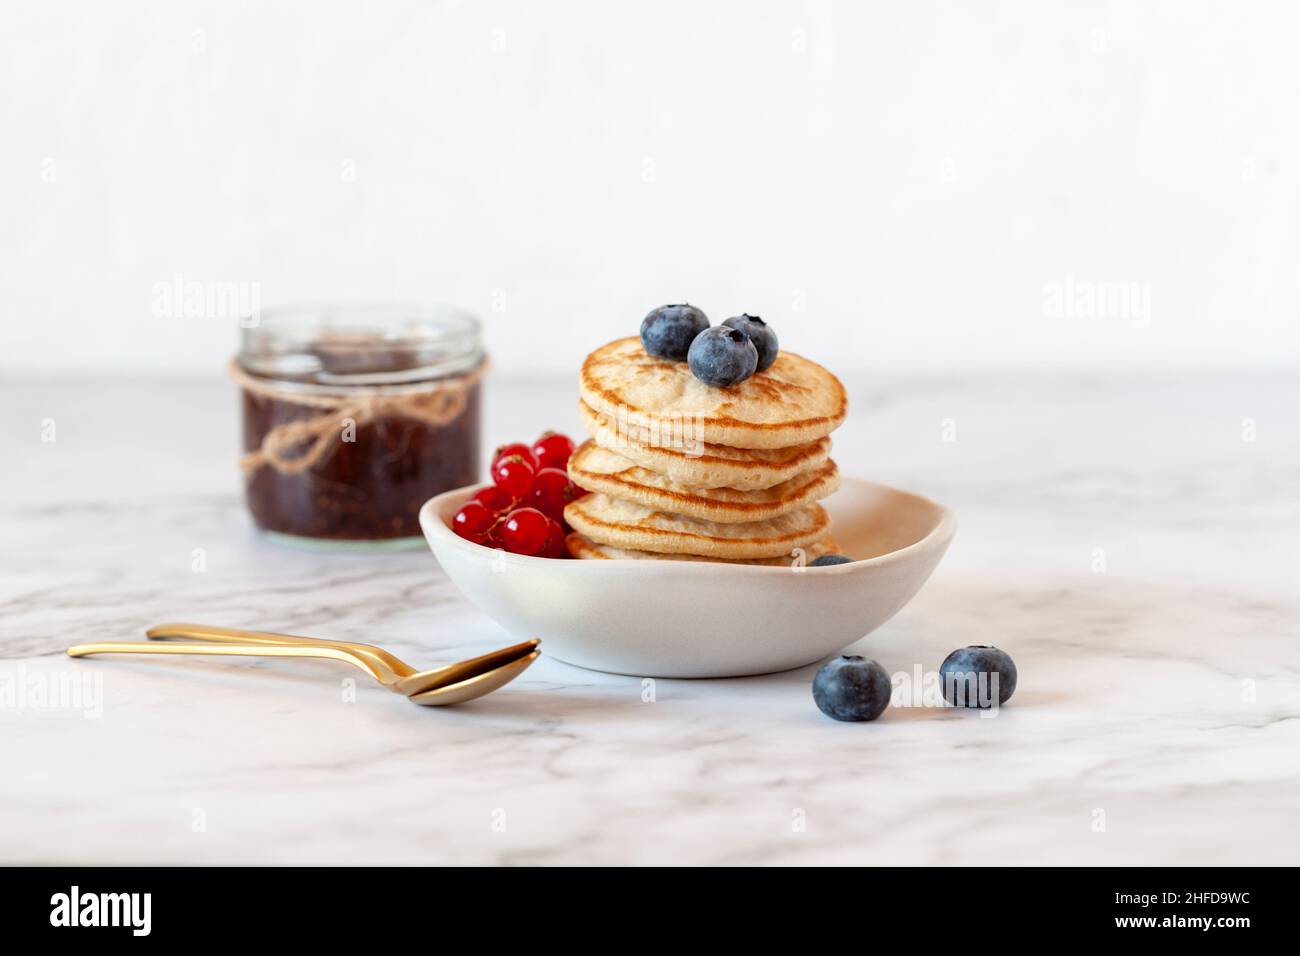 stack of buckwheat flour gluten free pancakes decorated with blueberry and redcurrant, symbol of Shrove Tuesday, selective focus Stock Photo